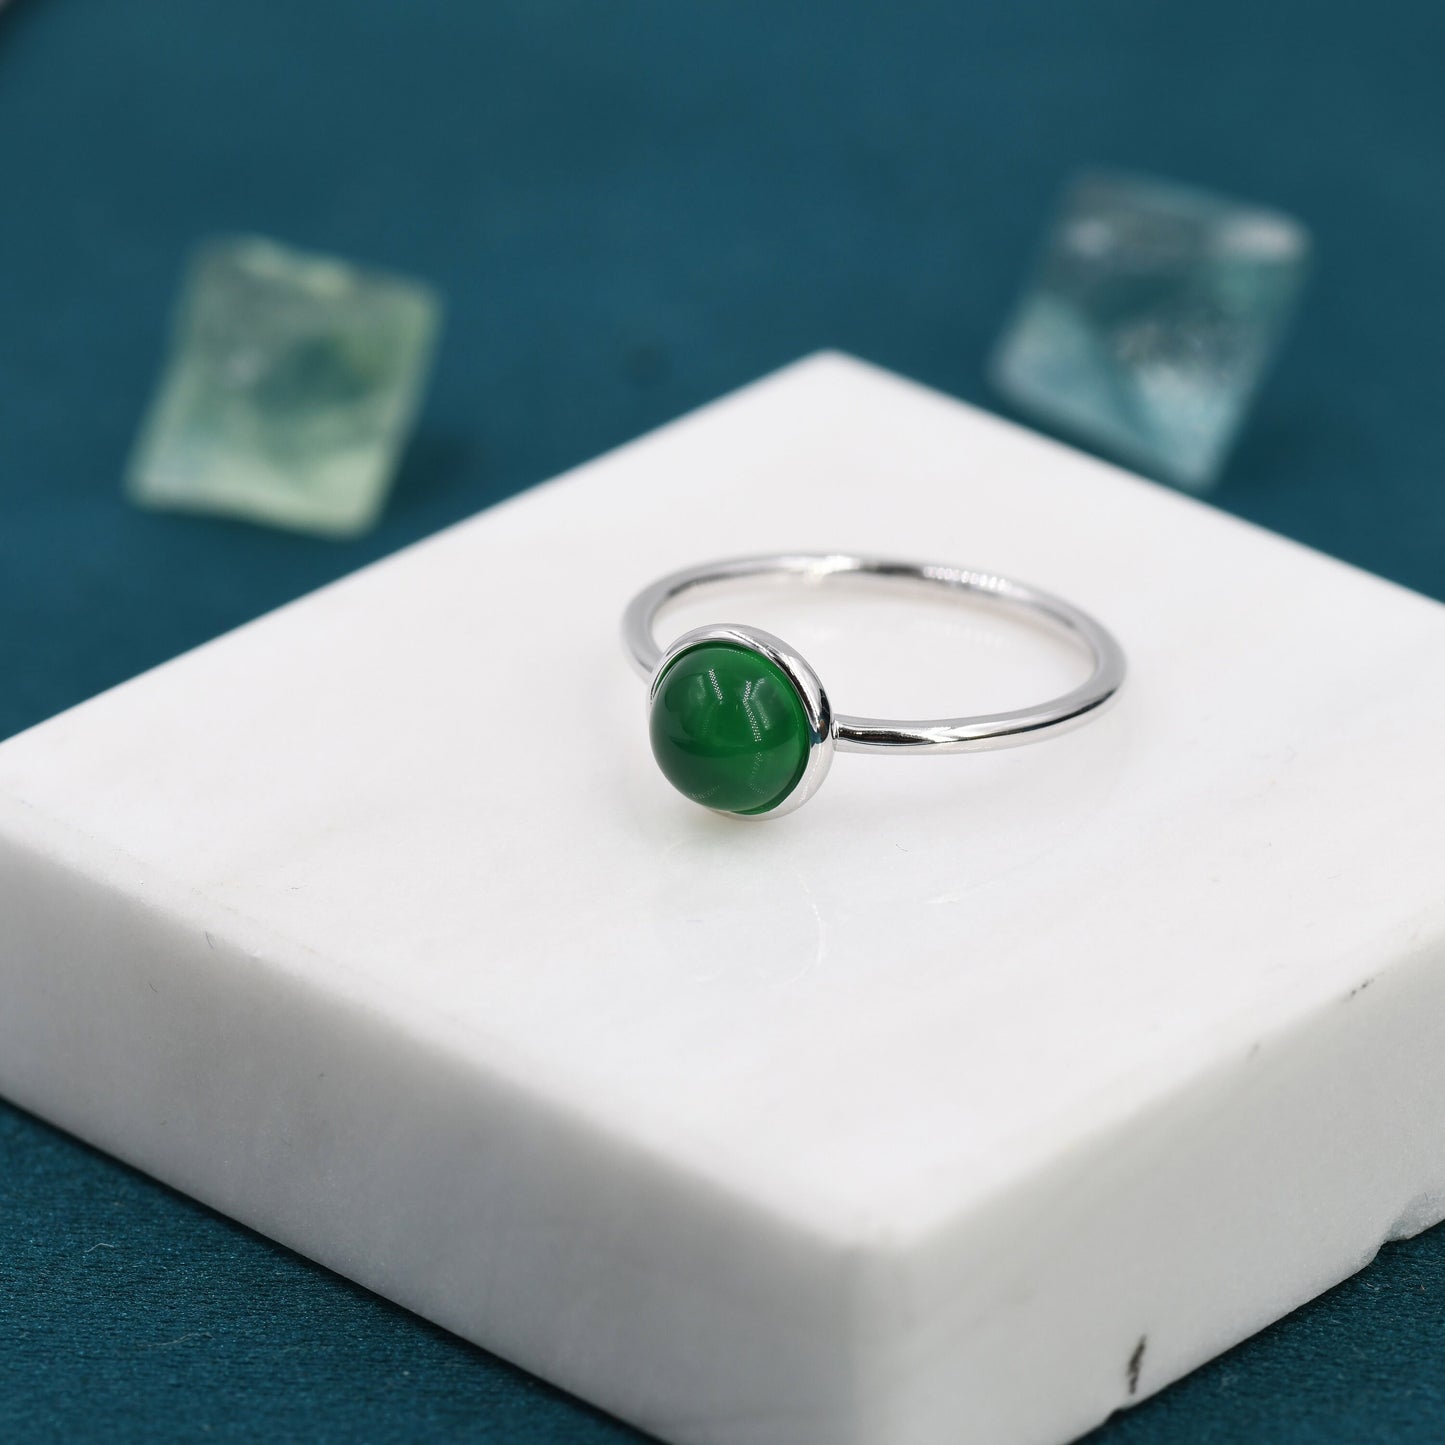 Genuine Green Onyx Ring in Sterling Silver, US 5 - 8, Natural Onyx Ring, Tiny Jade Ring?6mm Onyx Stone